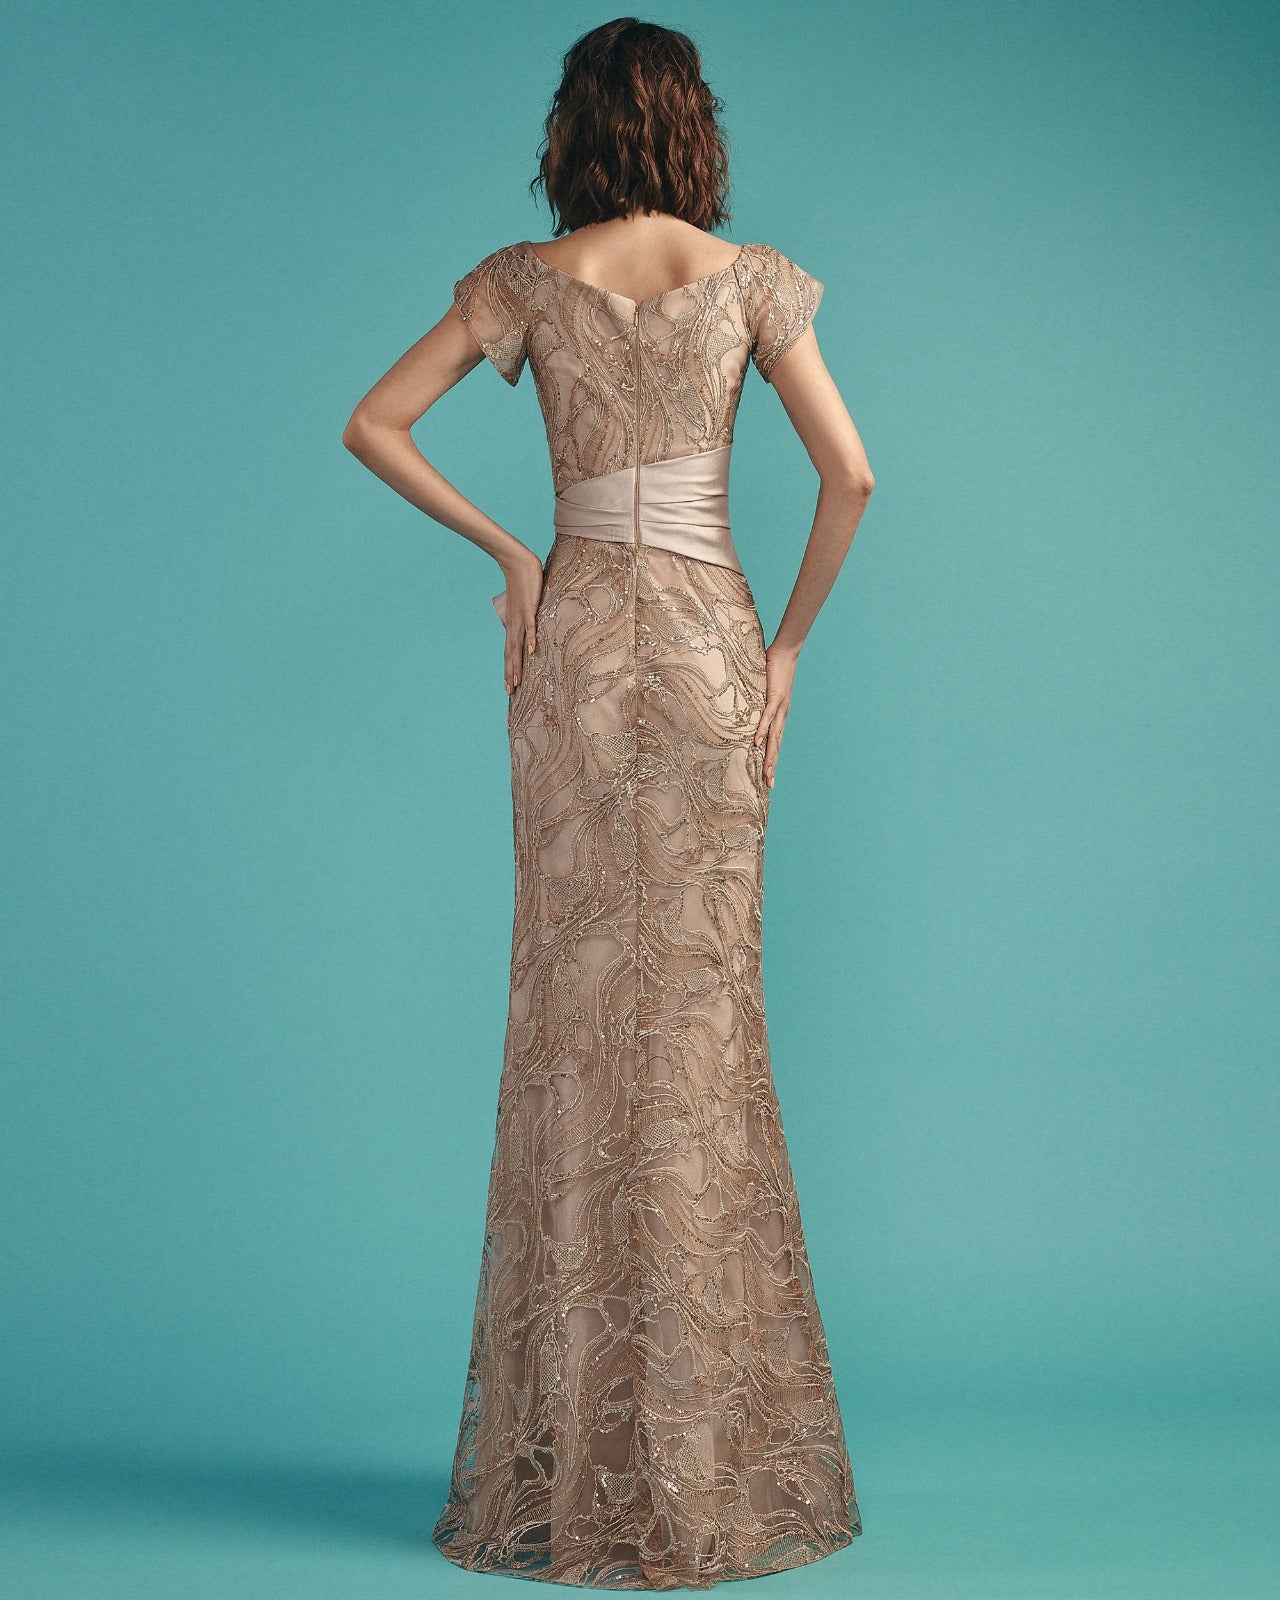 Back view of the Gemy Maalouf BC1485 dress showing the zipper detail and daring slit